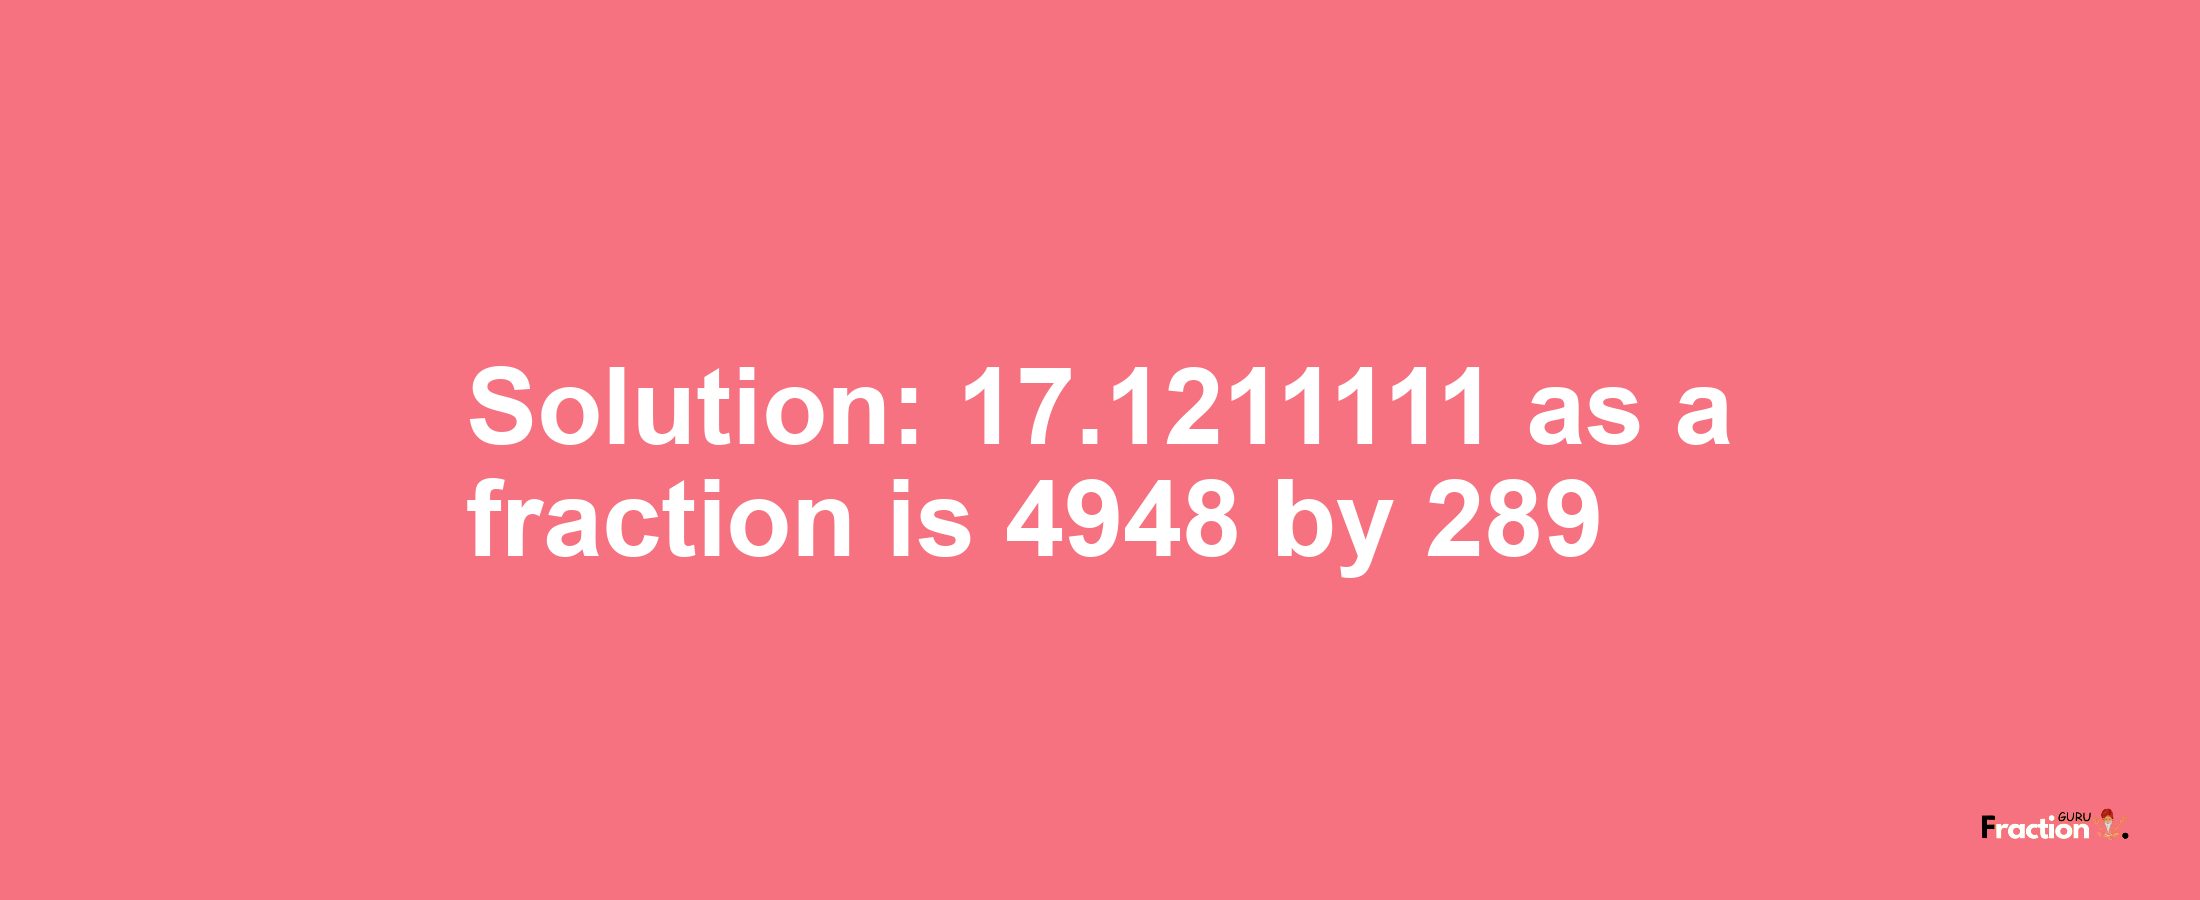 Solution:17.1211111 as a fraction is 4948/289